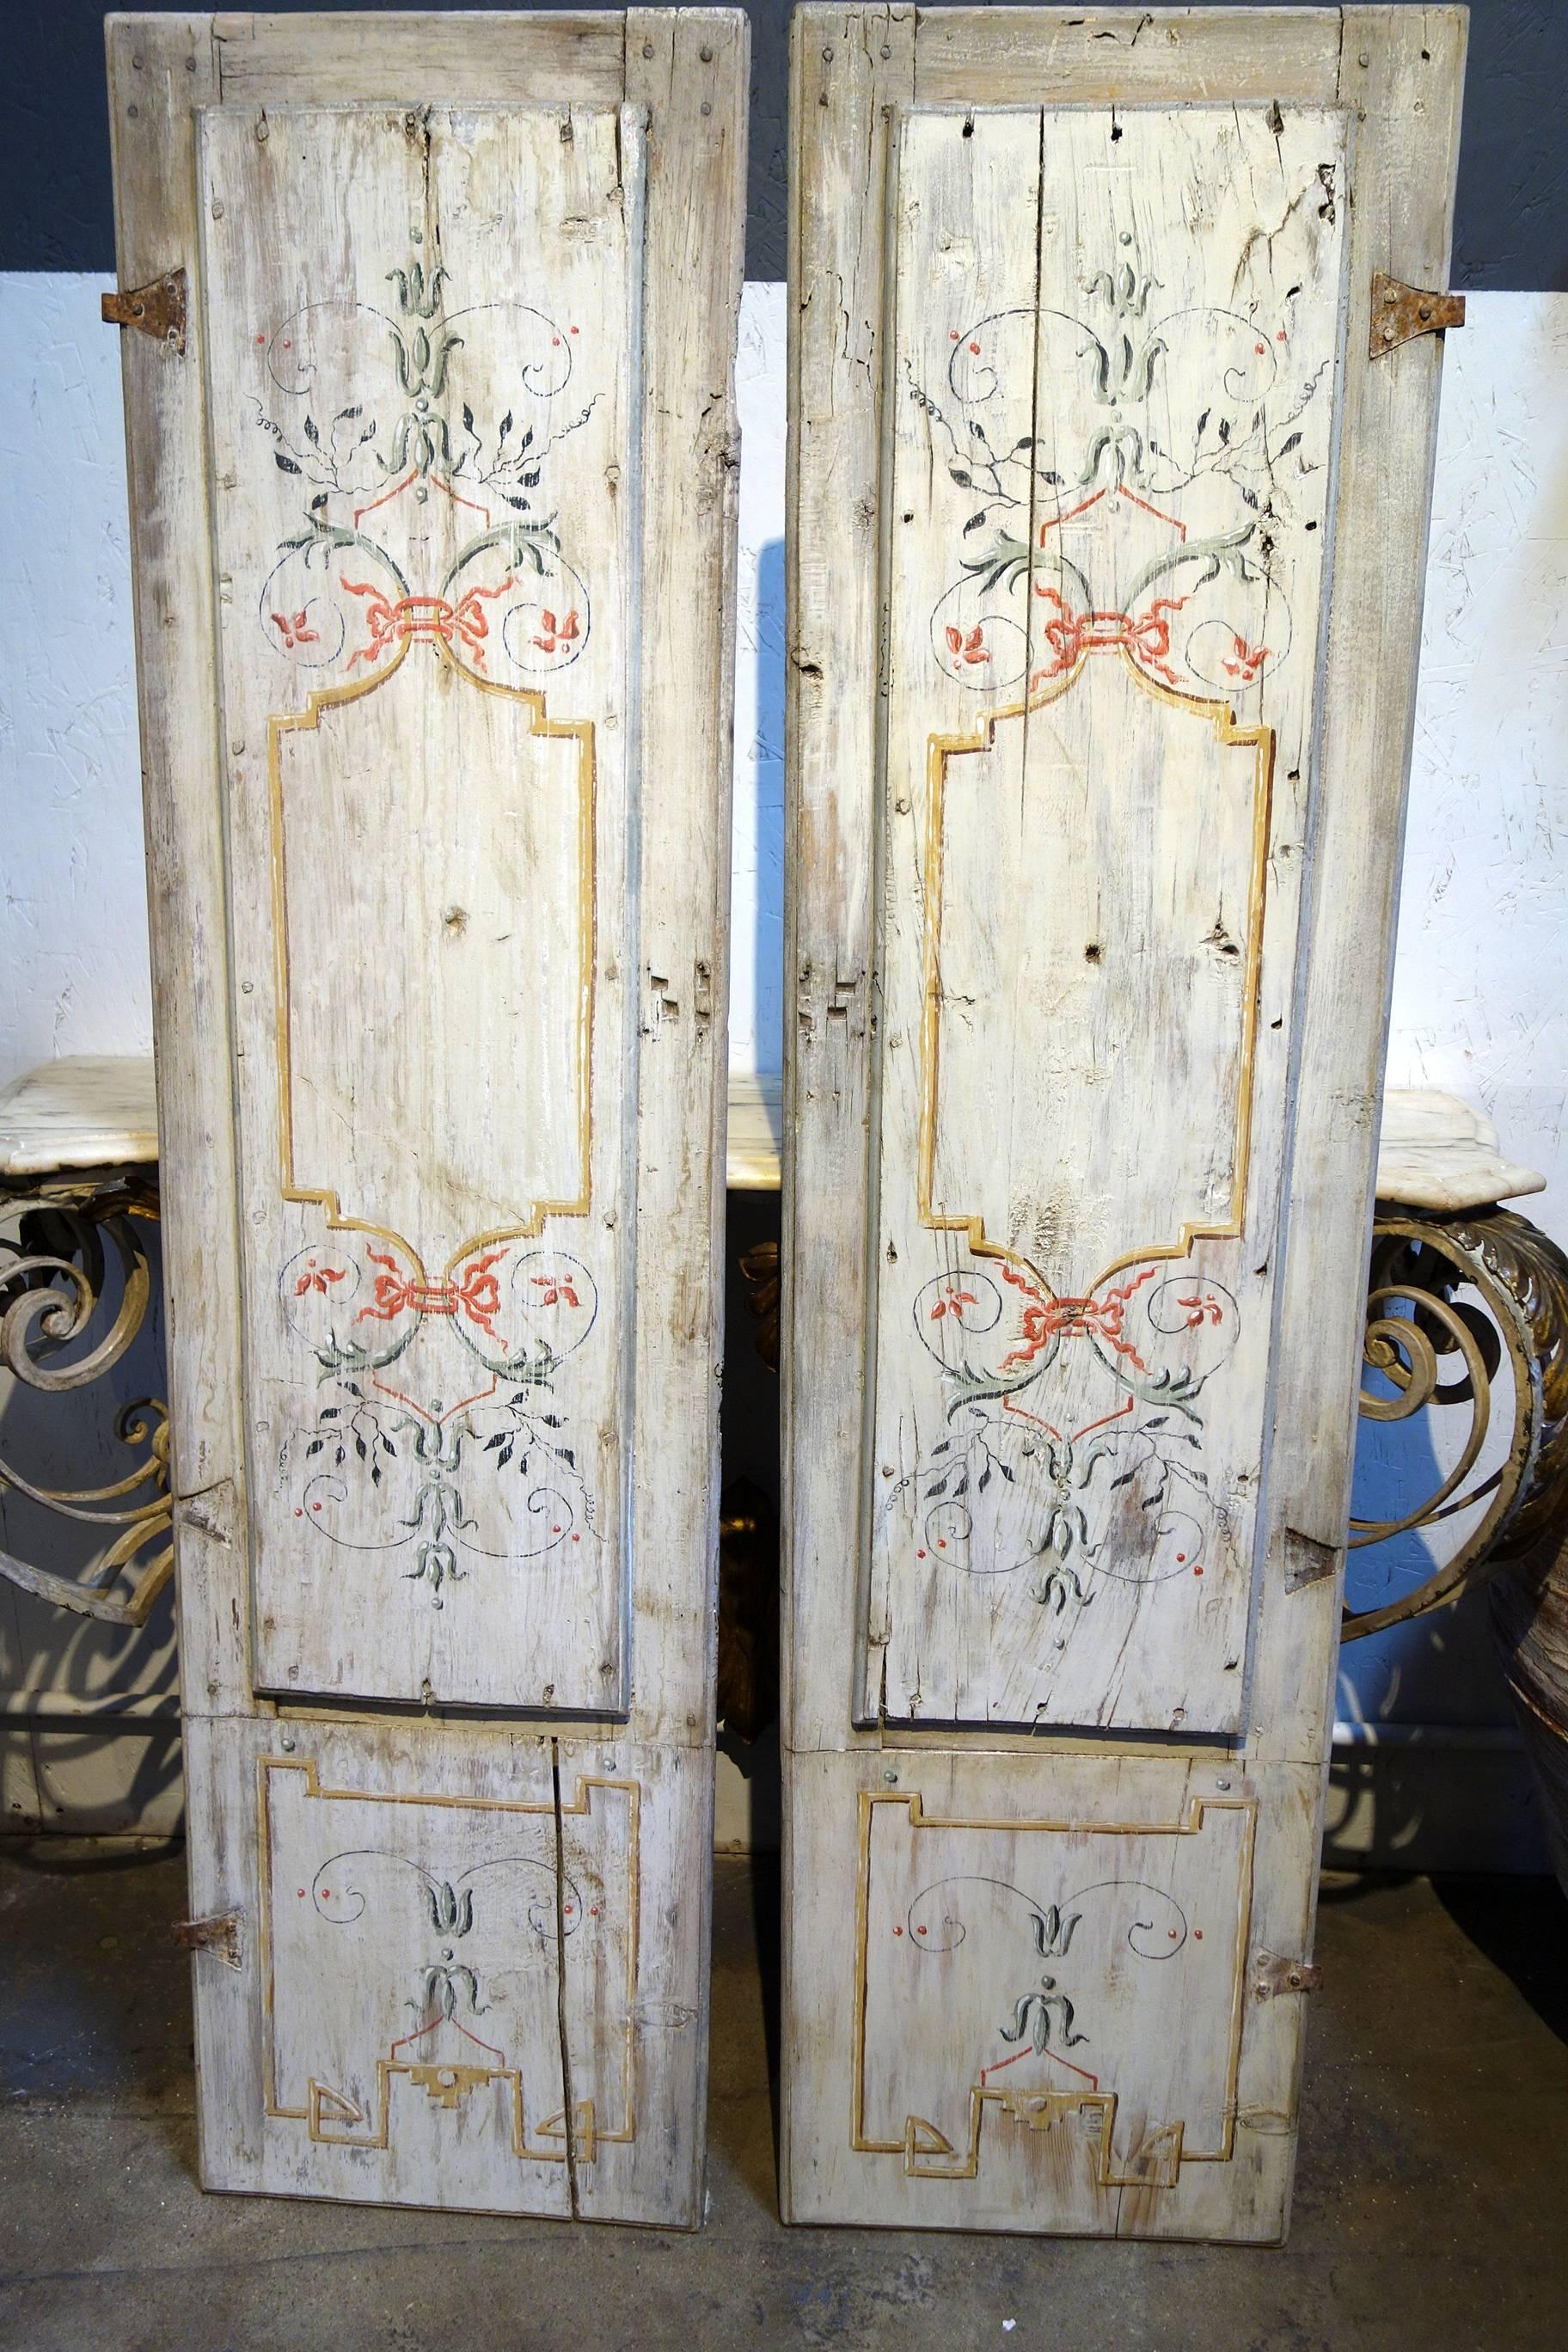 Lovely pair of hand-painted door panels with iron hinges. Well preserved old structure. Early 19th century.

Measures: 64” H, 16.75” W each panel, paired 33” W, 1.5” D.